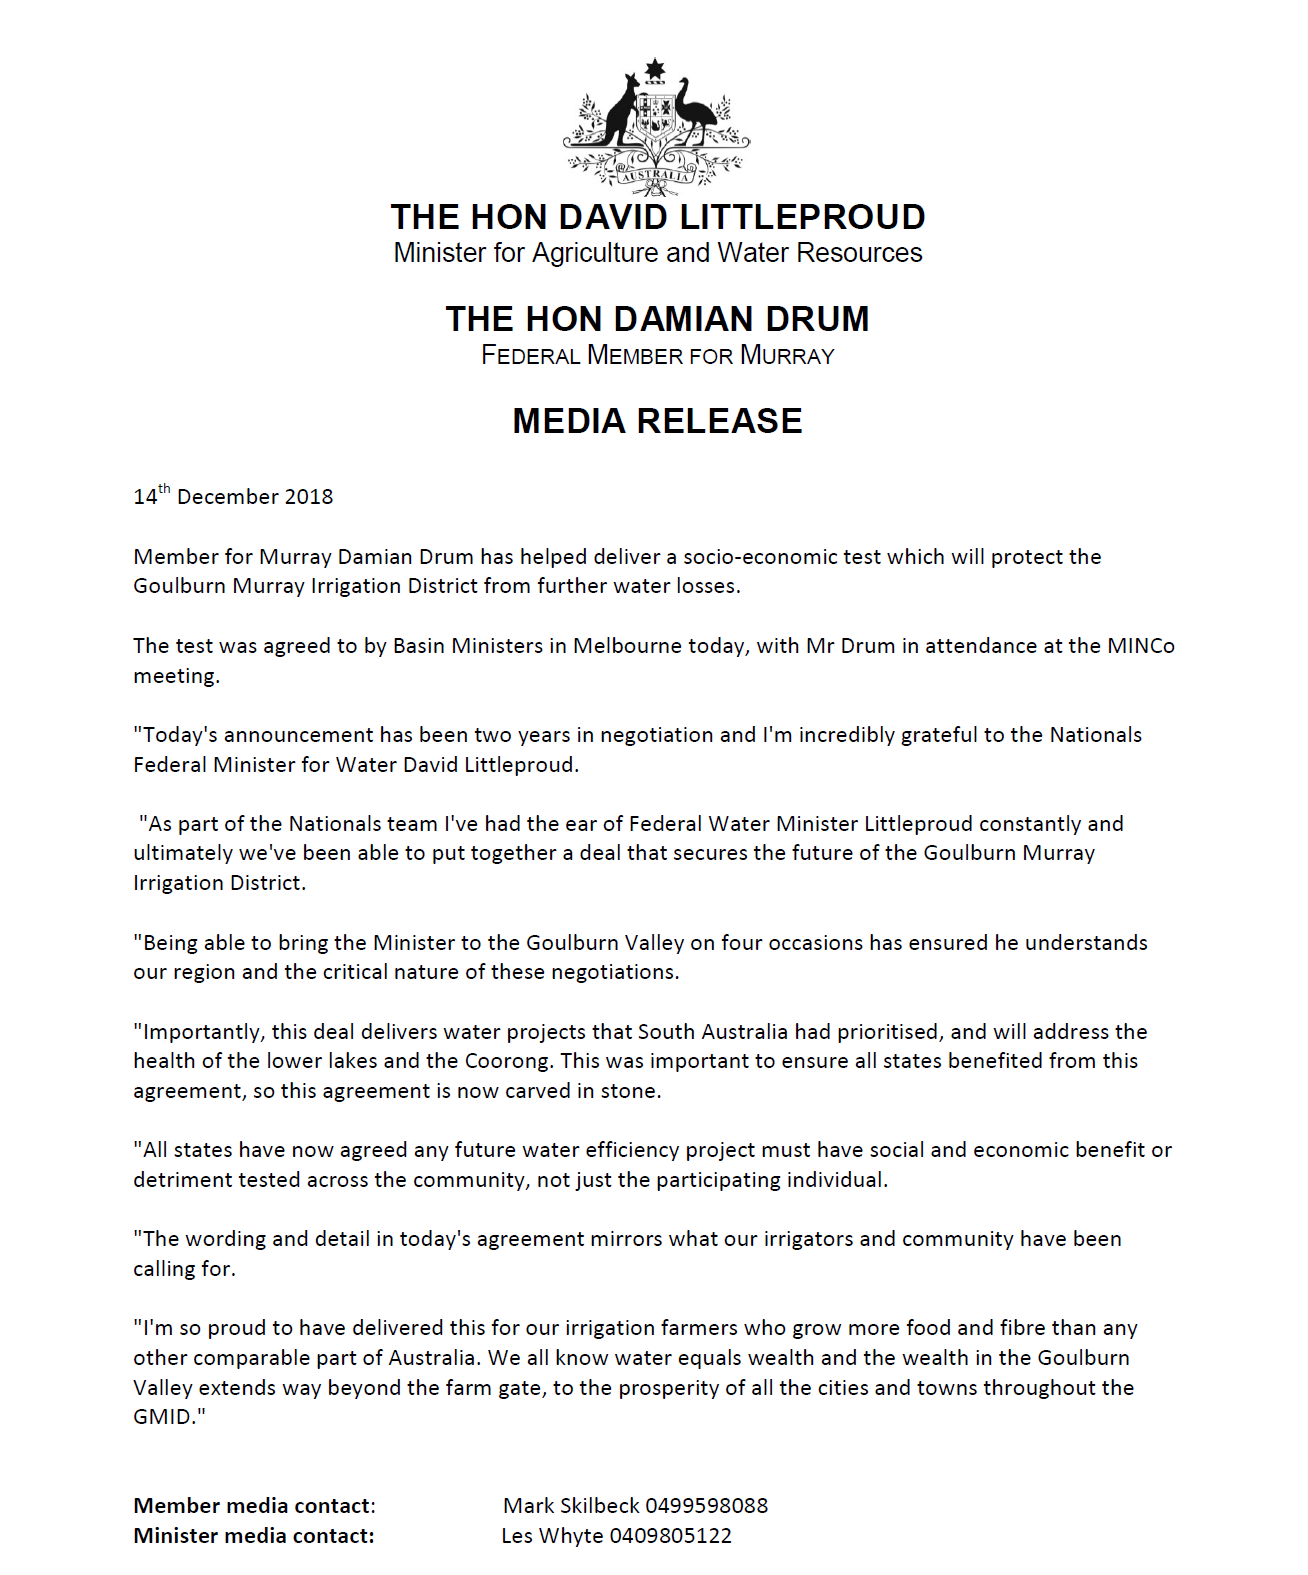 MEDIA RELEASE- FROM THE HON DAMIAN DRUM MP, FEDERAL MEMBER FOR MURRAY